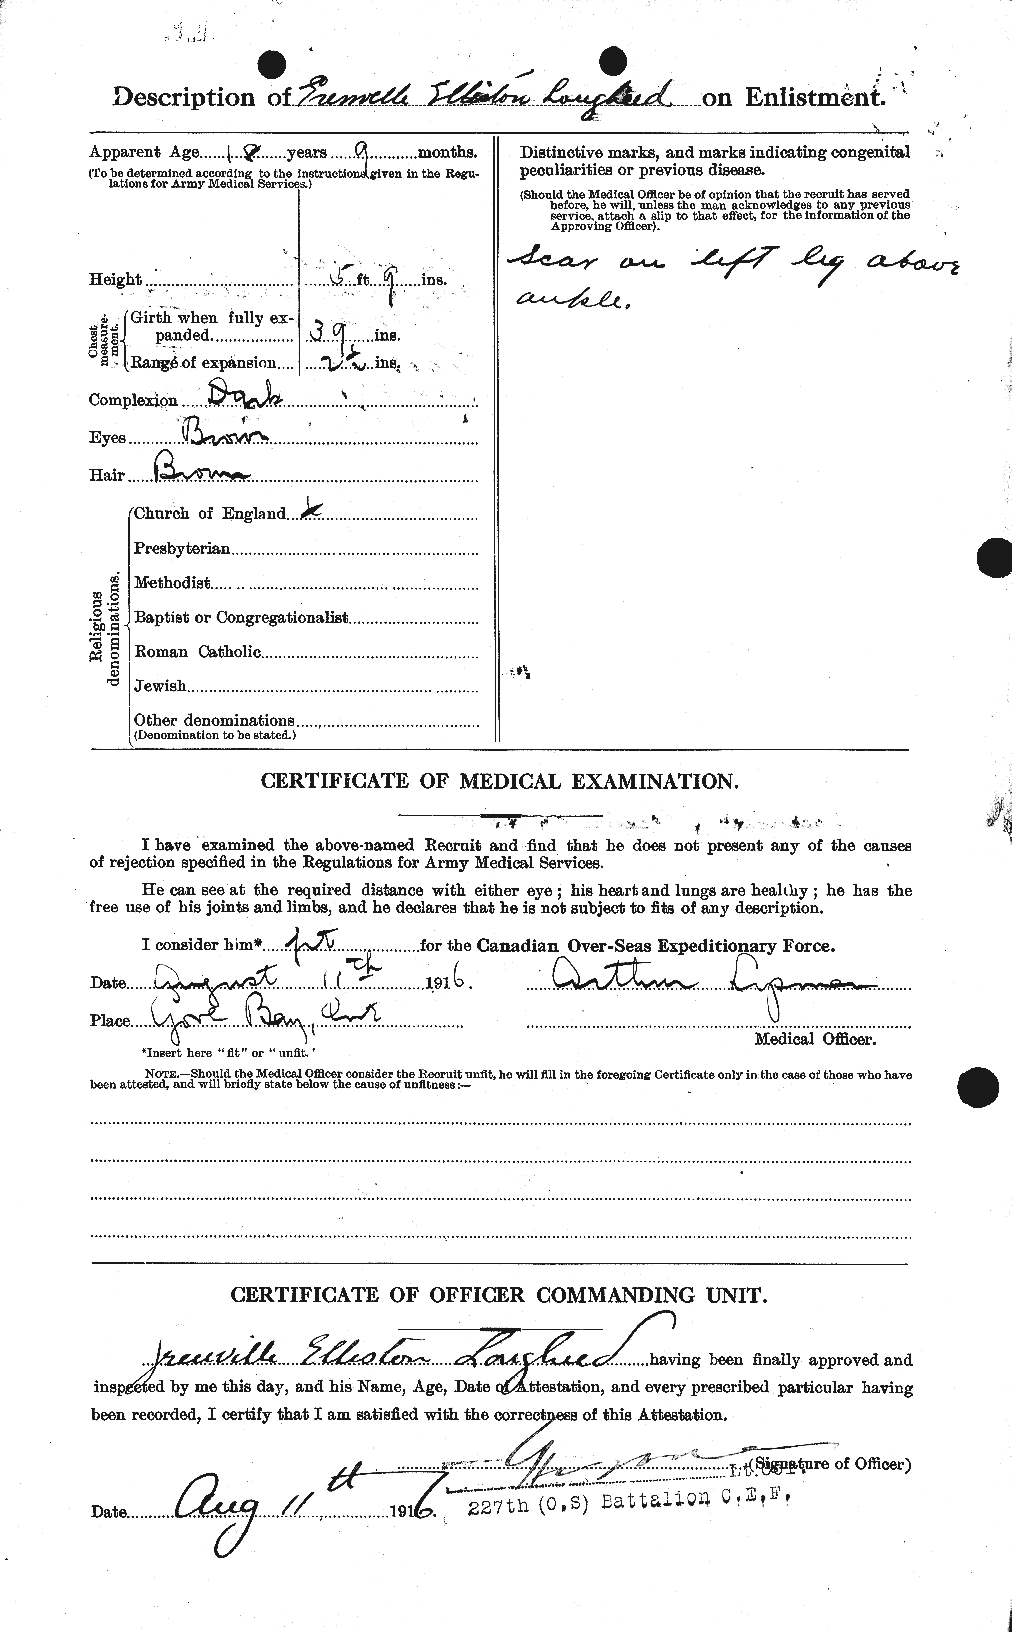 Personnel Records of the First World War - CEF 470398b